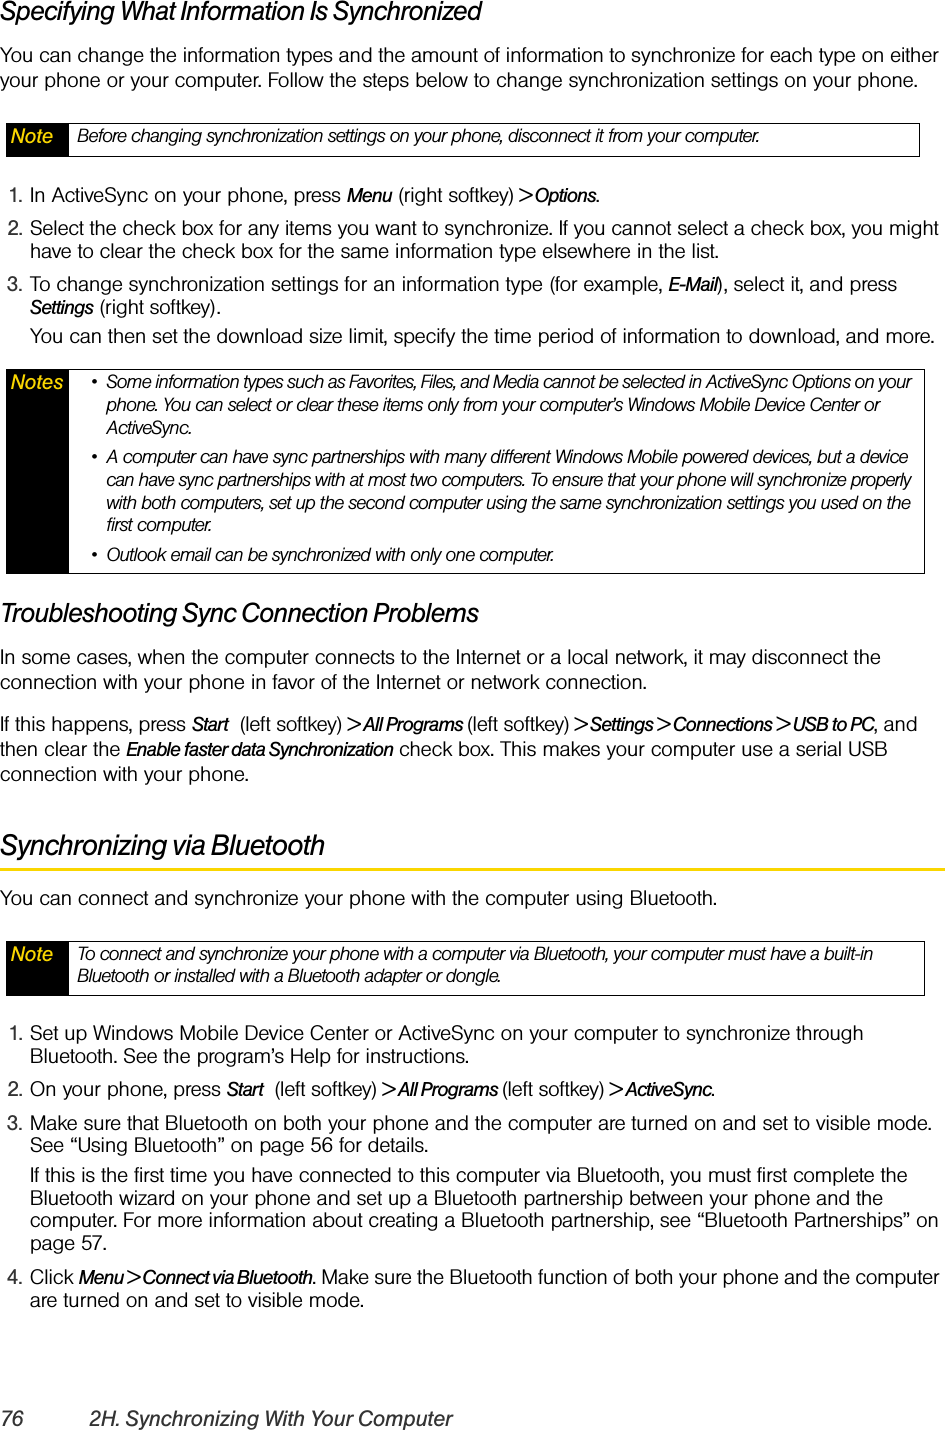 76 2H. Synchronizing With Your ComputerSpecifying What Information Is SynchronizedYou can change the information types and the amount of information to synchronize for each type on either your phone or your computer. Follow the steps below to change synchronization settings on your phone.1. In ActiveSync on your phone, press Menu (right softkey) &gt; Options.2. Select the check box for any items you want to synchronize. If you cannot select a check box, you might have to clear the check box for the same information type elsewhere in the list.3. To change synchronization settings for an information type (for example, E-Mail), select it, and press Settings (right softkey).You can then set the download size limit, specify the time period of information to download, and more.Troubleshooting Sync Connection ProblemsIn some cases, when the computer connects to the Internet or a local network, it may disconnect the connection with your phone in favor of the Internet or network connection.If this happens, press Start   (left softkey) &gt; All Programs (left softkey) &gt; Settings &gt; Connections &gt; USB to PC, and then clear the Enable faster data Synchronization check box. This makes your computer use a serial USB connection with your phone.Synchronizing via BluetoothYou can connect and synchronize your phone with the computer using Bluetooth.1. Set up Windows Mobile Device Center or ActiveSync on your computer to synchronize through Bluetooth. See the program’s Help for instructions.2. On your phone, press Start   (left softkey) &gt; All Programs (left softkey) &gt; ActiveSync.3. Make sure that Bluetooth on both your phone and the computer are turned on and set to visible mode. See “Using Bluetooth” on page 56 for details.If this is the first time you have connected to this computer via Bluetooth, you must first complete the Bluetooth wizard on your phone and set up a Bluetooth partnership between your phone and the computer. For more information about creating a Bluetooth partnership, see “Bluetooth Partnerships” on page 57.4. Click Menu &gt; Connect via Bluetooth. Make sure the Bluetooth function of both your phone and the computer are turned on and set to visible mode.Note Before changing synchronization settings on your phone, disconnect it from your computer.Notes • Some information types such as Favorites, Files, and Media cannot be selected in ActiveSync Options on your phone. You can select or clear these items only from your computer’s Windows Mobile Device Center or ActiveSync.• A computer can have sync partnerships with many different Windows Mobile powered devices, but a device can have sync partnerships with at most two computers. To ensure that your phone will synchronize properly with both computers, set up the second computer using the same synchronization settings you used on the first computer.• Outlook email can be synchronized with only one computer.Note To connect and synchronize your phone with a computer via Bluetooth, your computer must have a built-in Bluetooth or installed with a Bluetooth adapter or dongle.